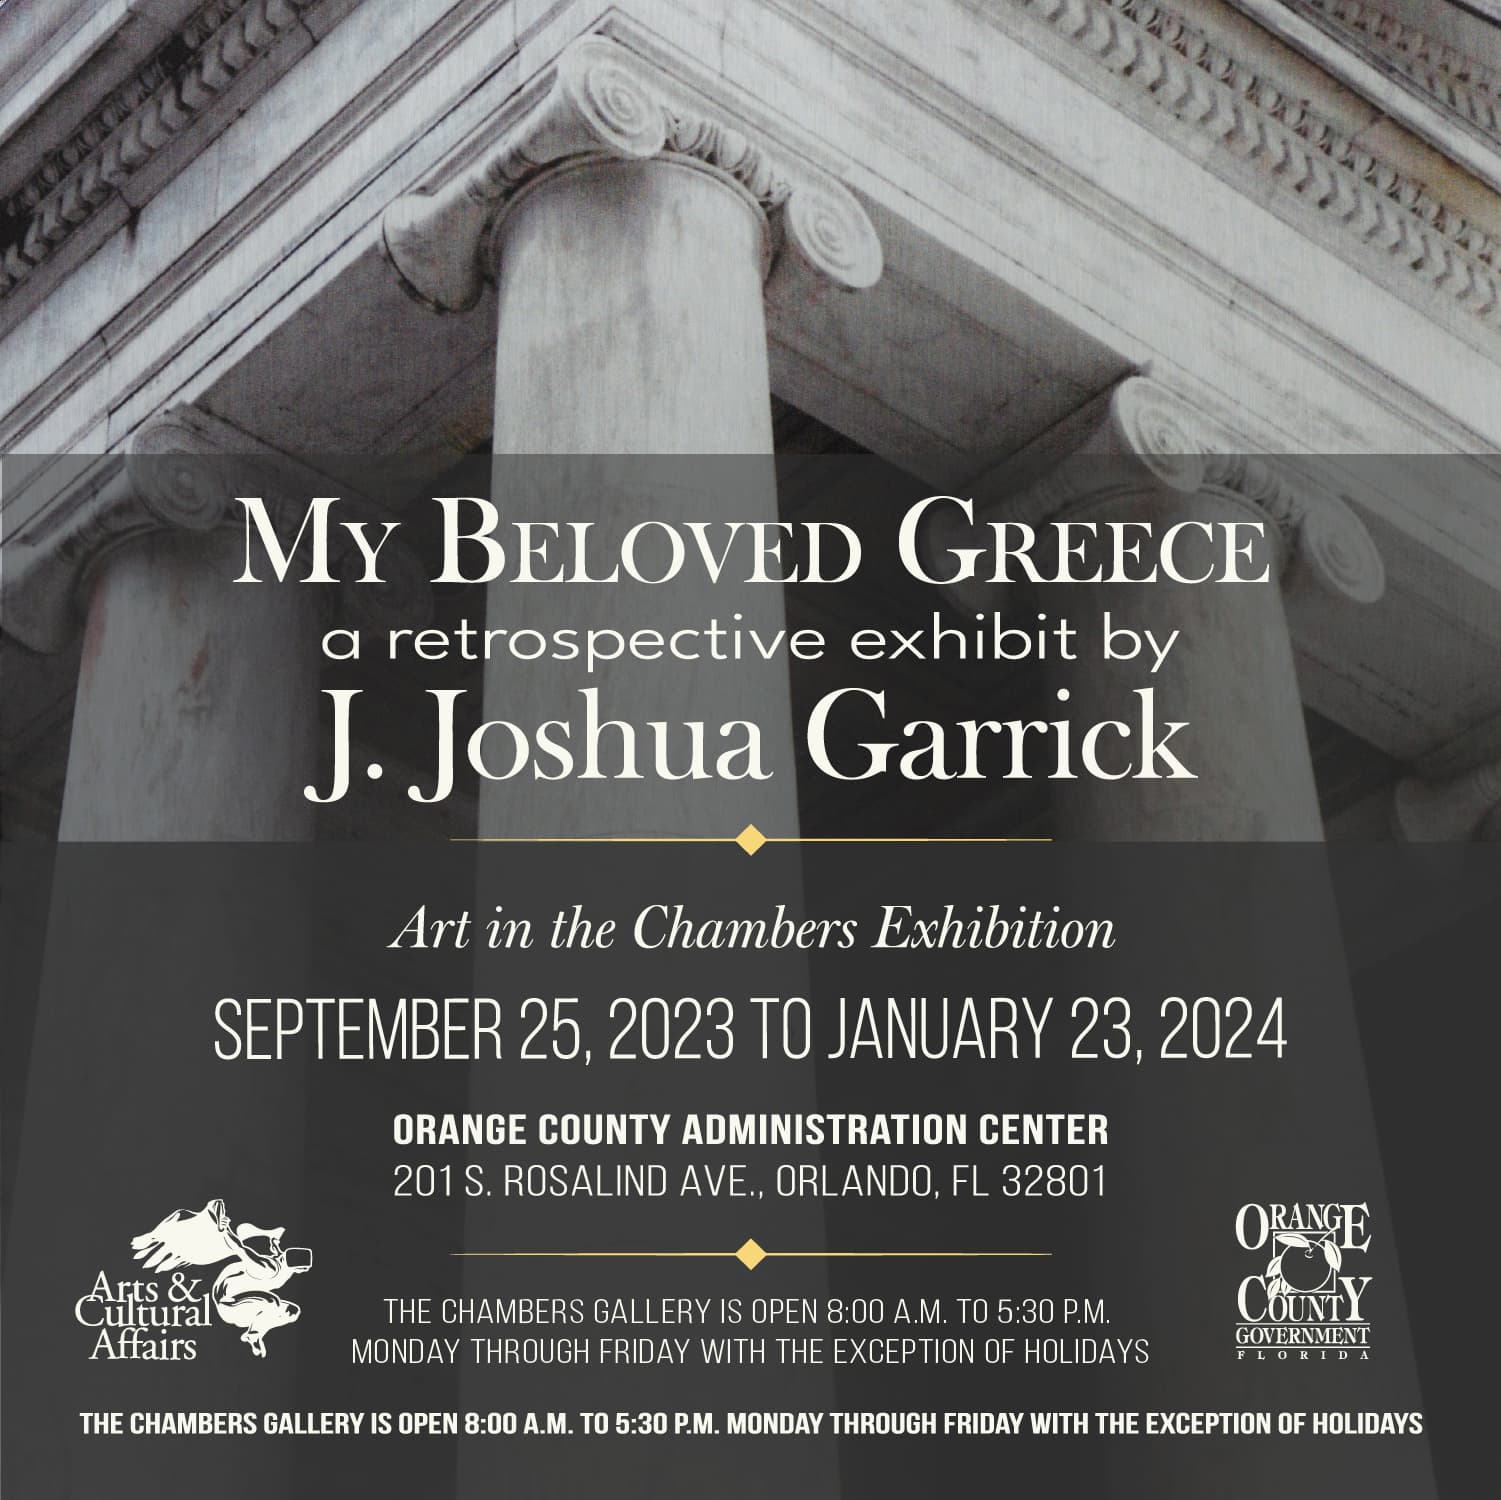 My Beloved Greece - a retrospective exhibit by J. Joshua Garrick - Art in the Chambers Exhibition - September 25, 2023 to January 23, 2024 - Orange County Administration Center - 201 S. Rosalind Ave., Orlando, FL 32801 - The Chambers Gallery is open 8:00 A.M. to 5:30 P.M. Monday through Friday with the exception of holidays.